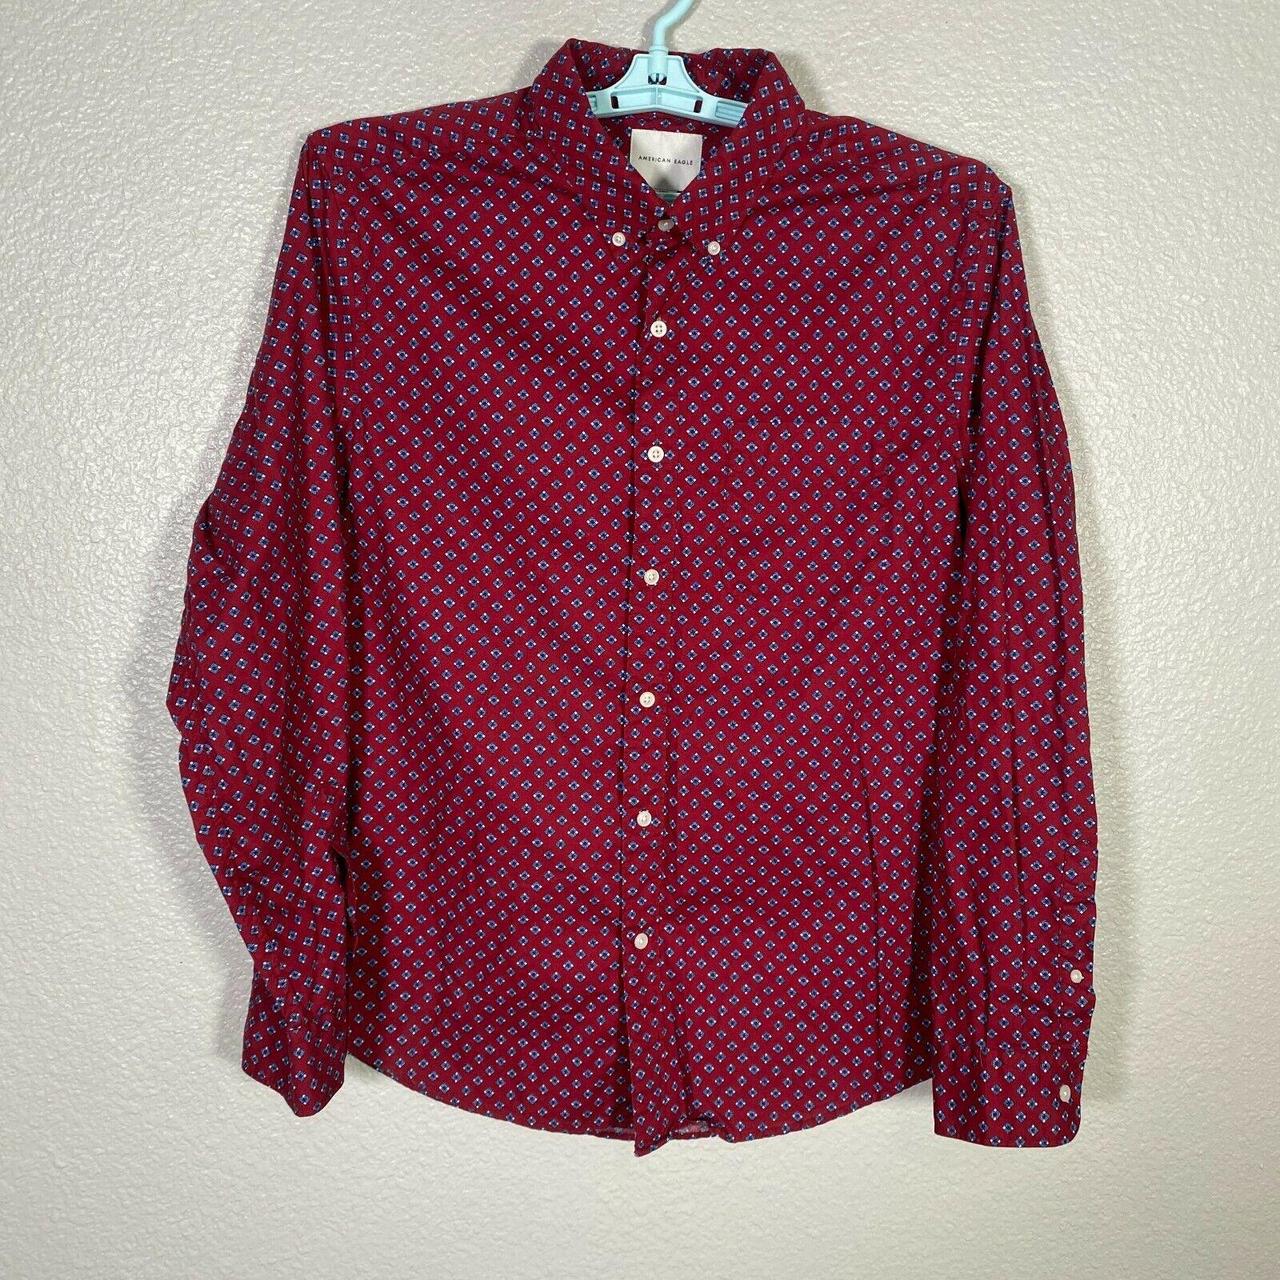 American Eagle Button Down Shirt Mens Large Red Blue... - Depop